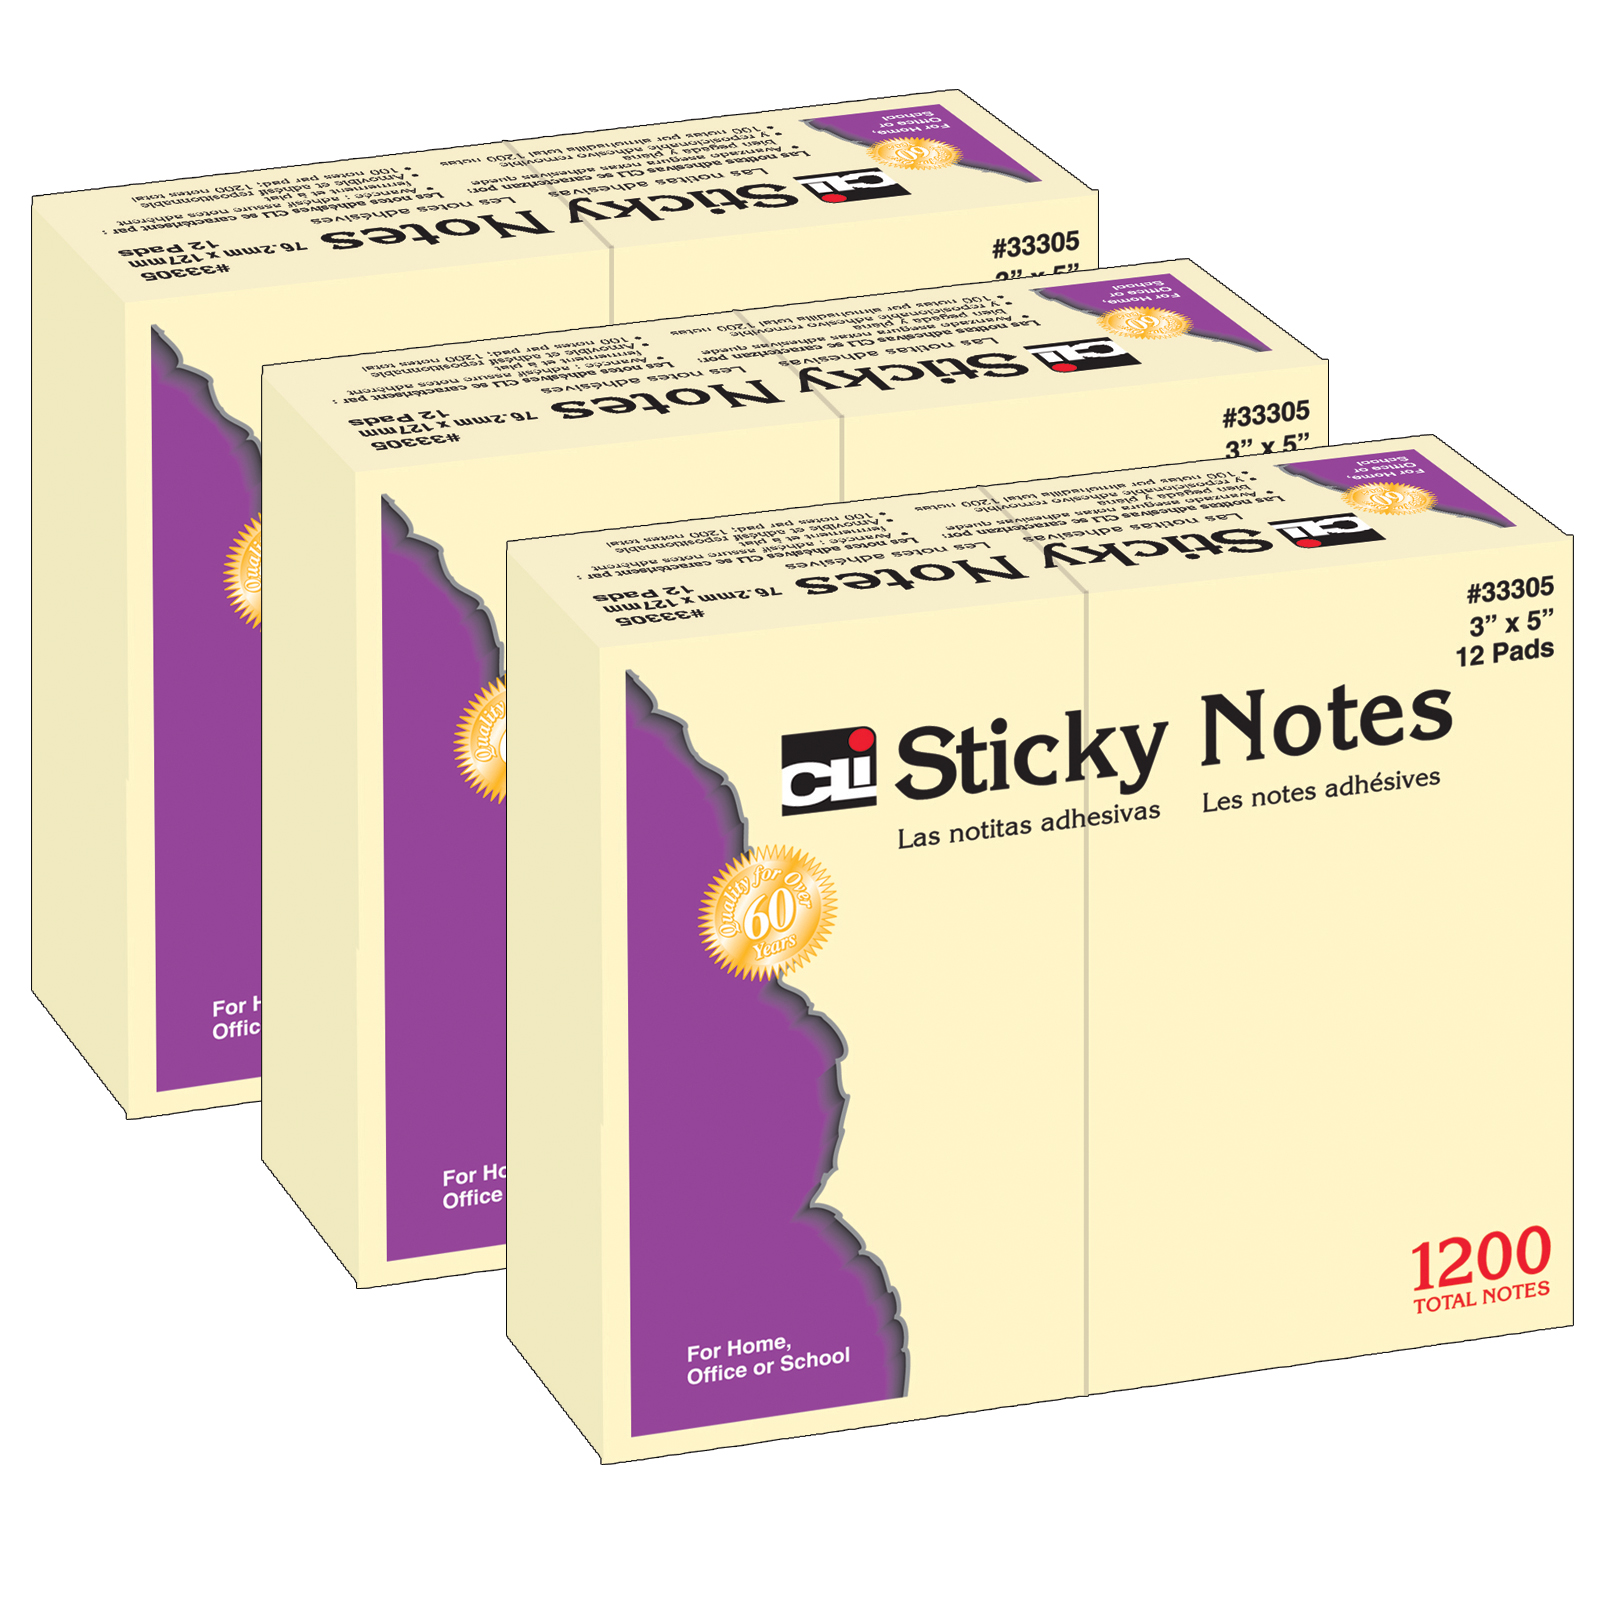 Sticky Note Pads, 3" x 5" Plain, 12 Per Pack, 3 Packs